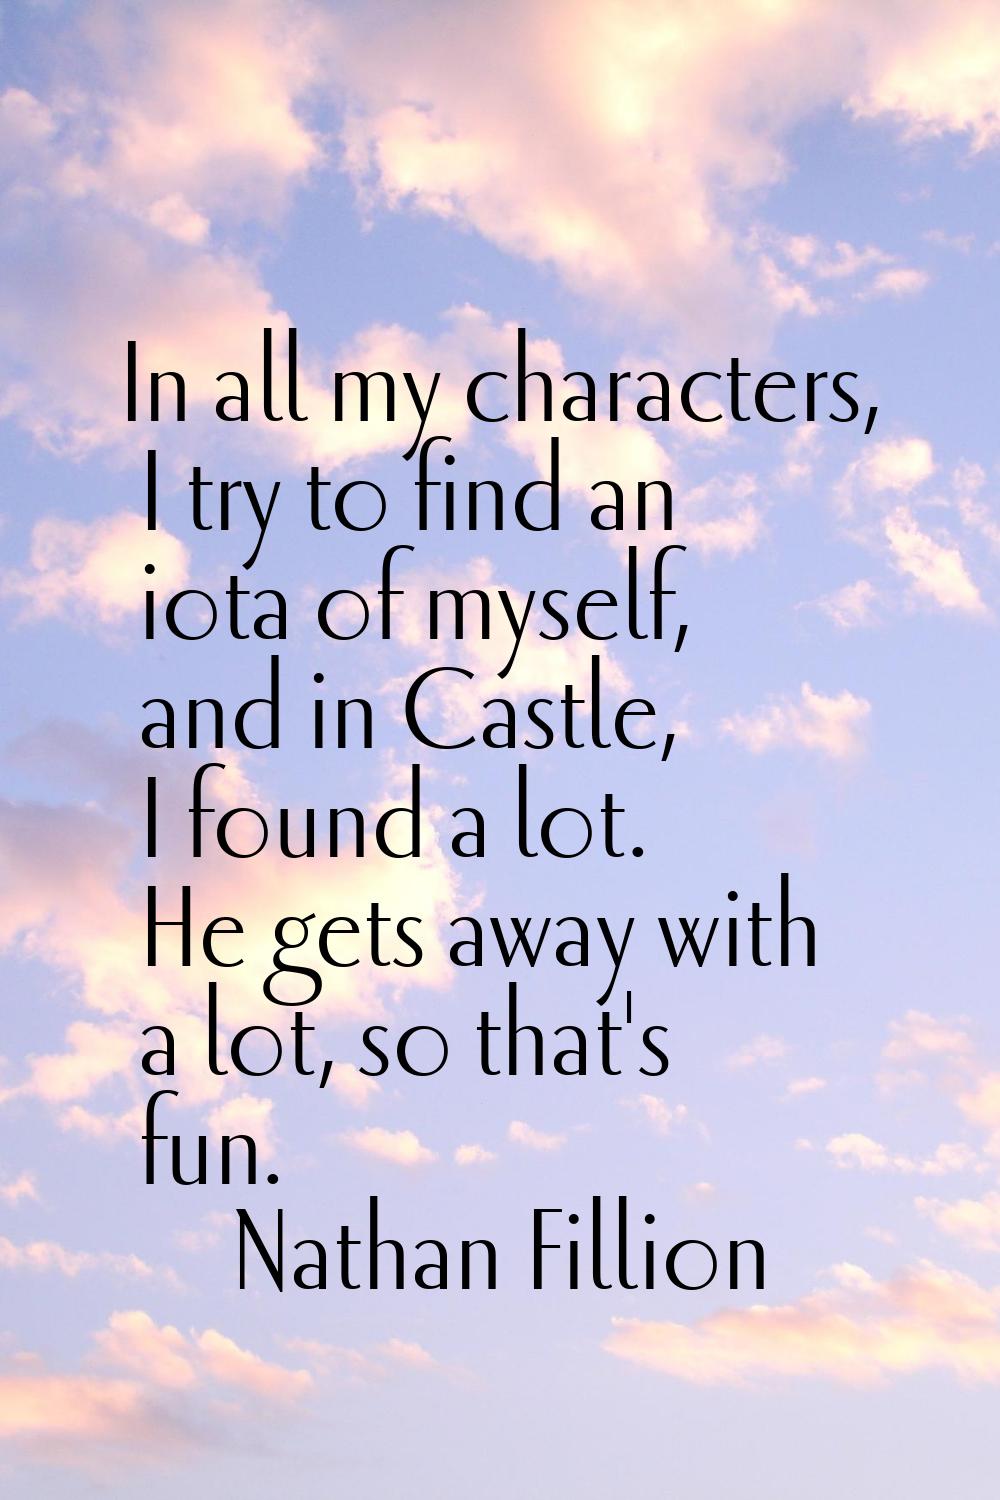 In all my characters, I try to find an iota of myself, and in Castle, I found a lot. He gets away w